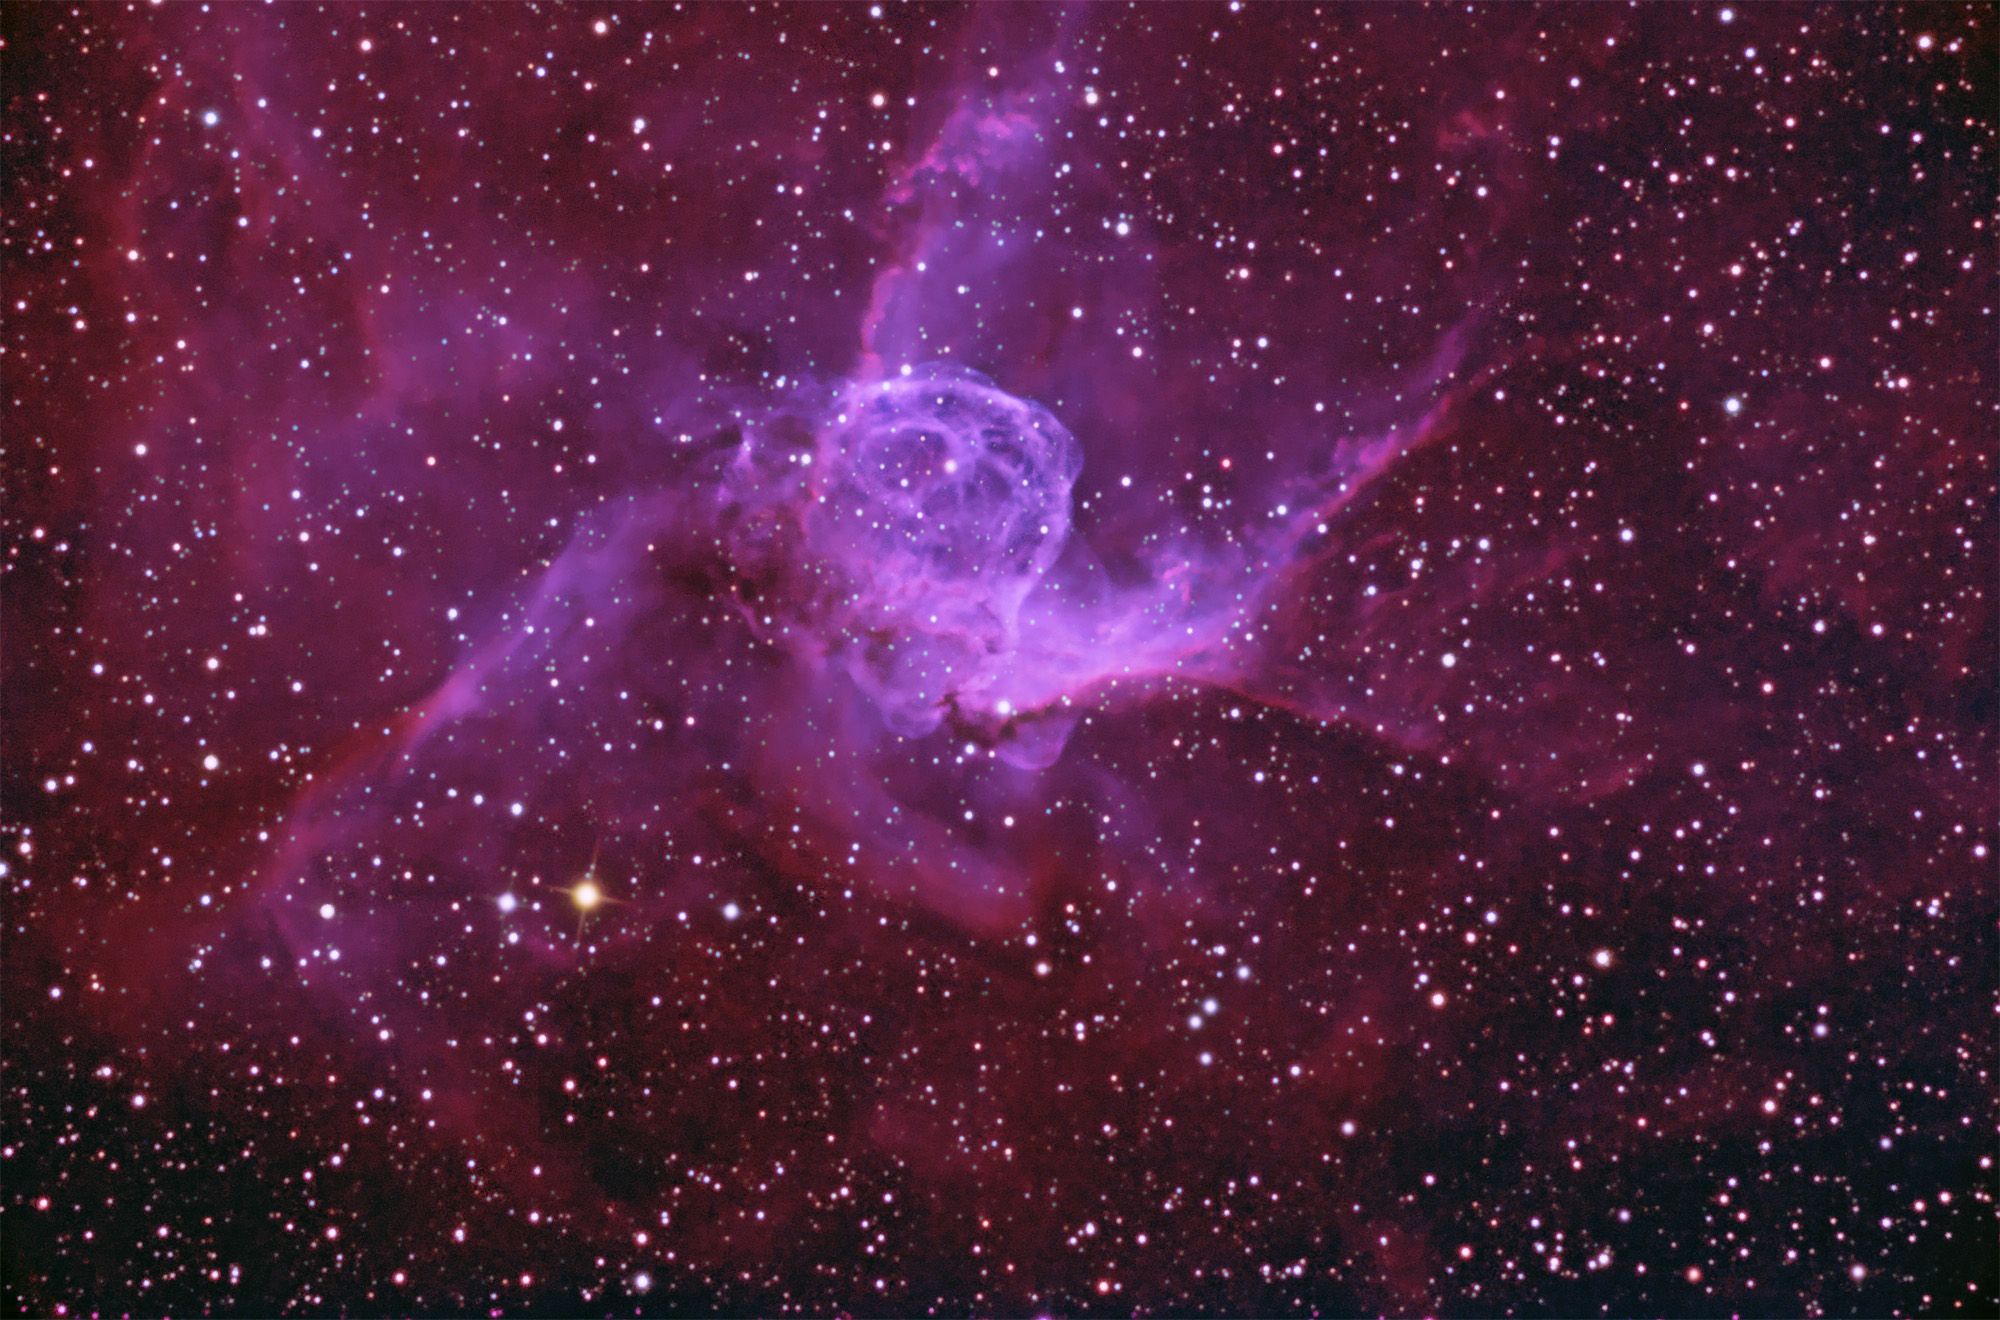 Thor’s Helmet in H-a, OIII, RGB